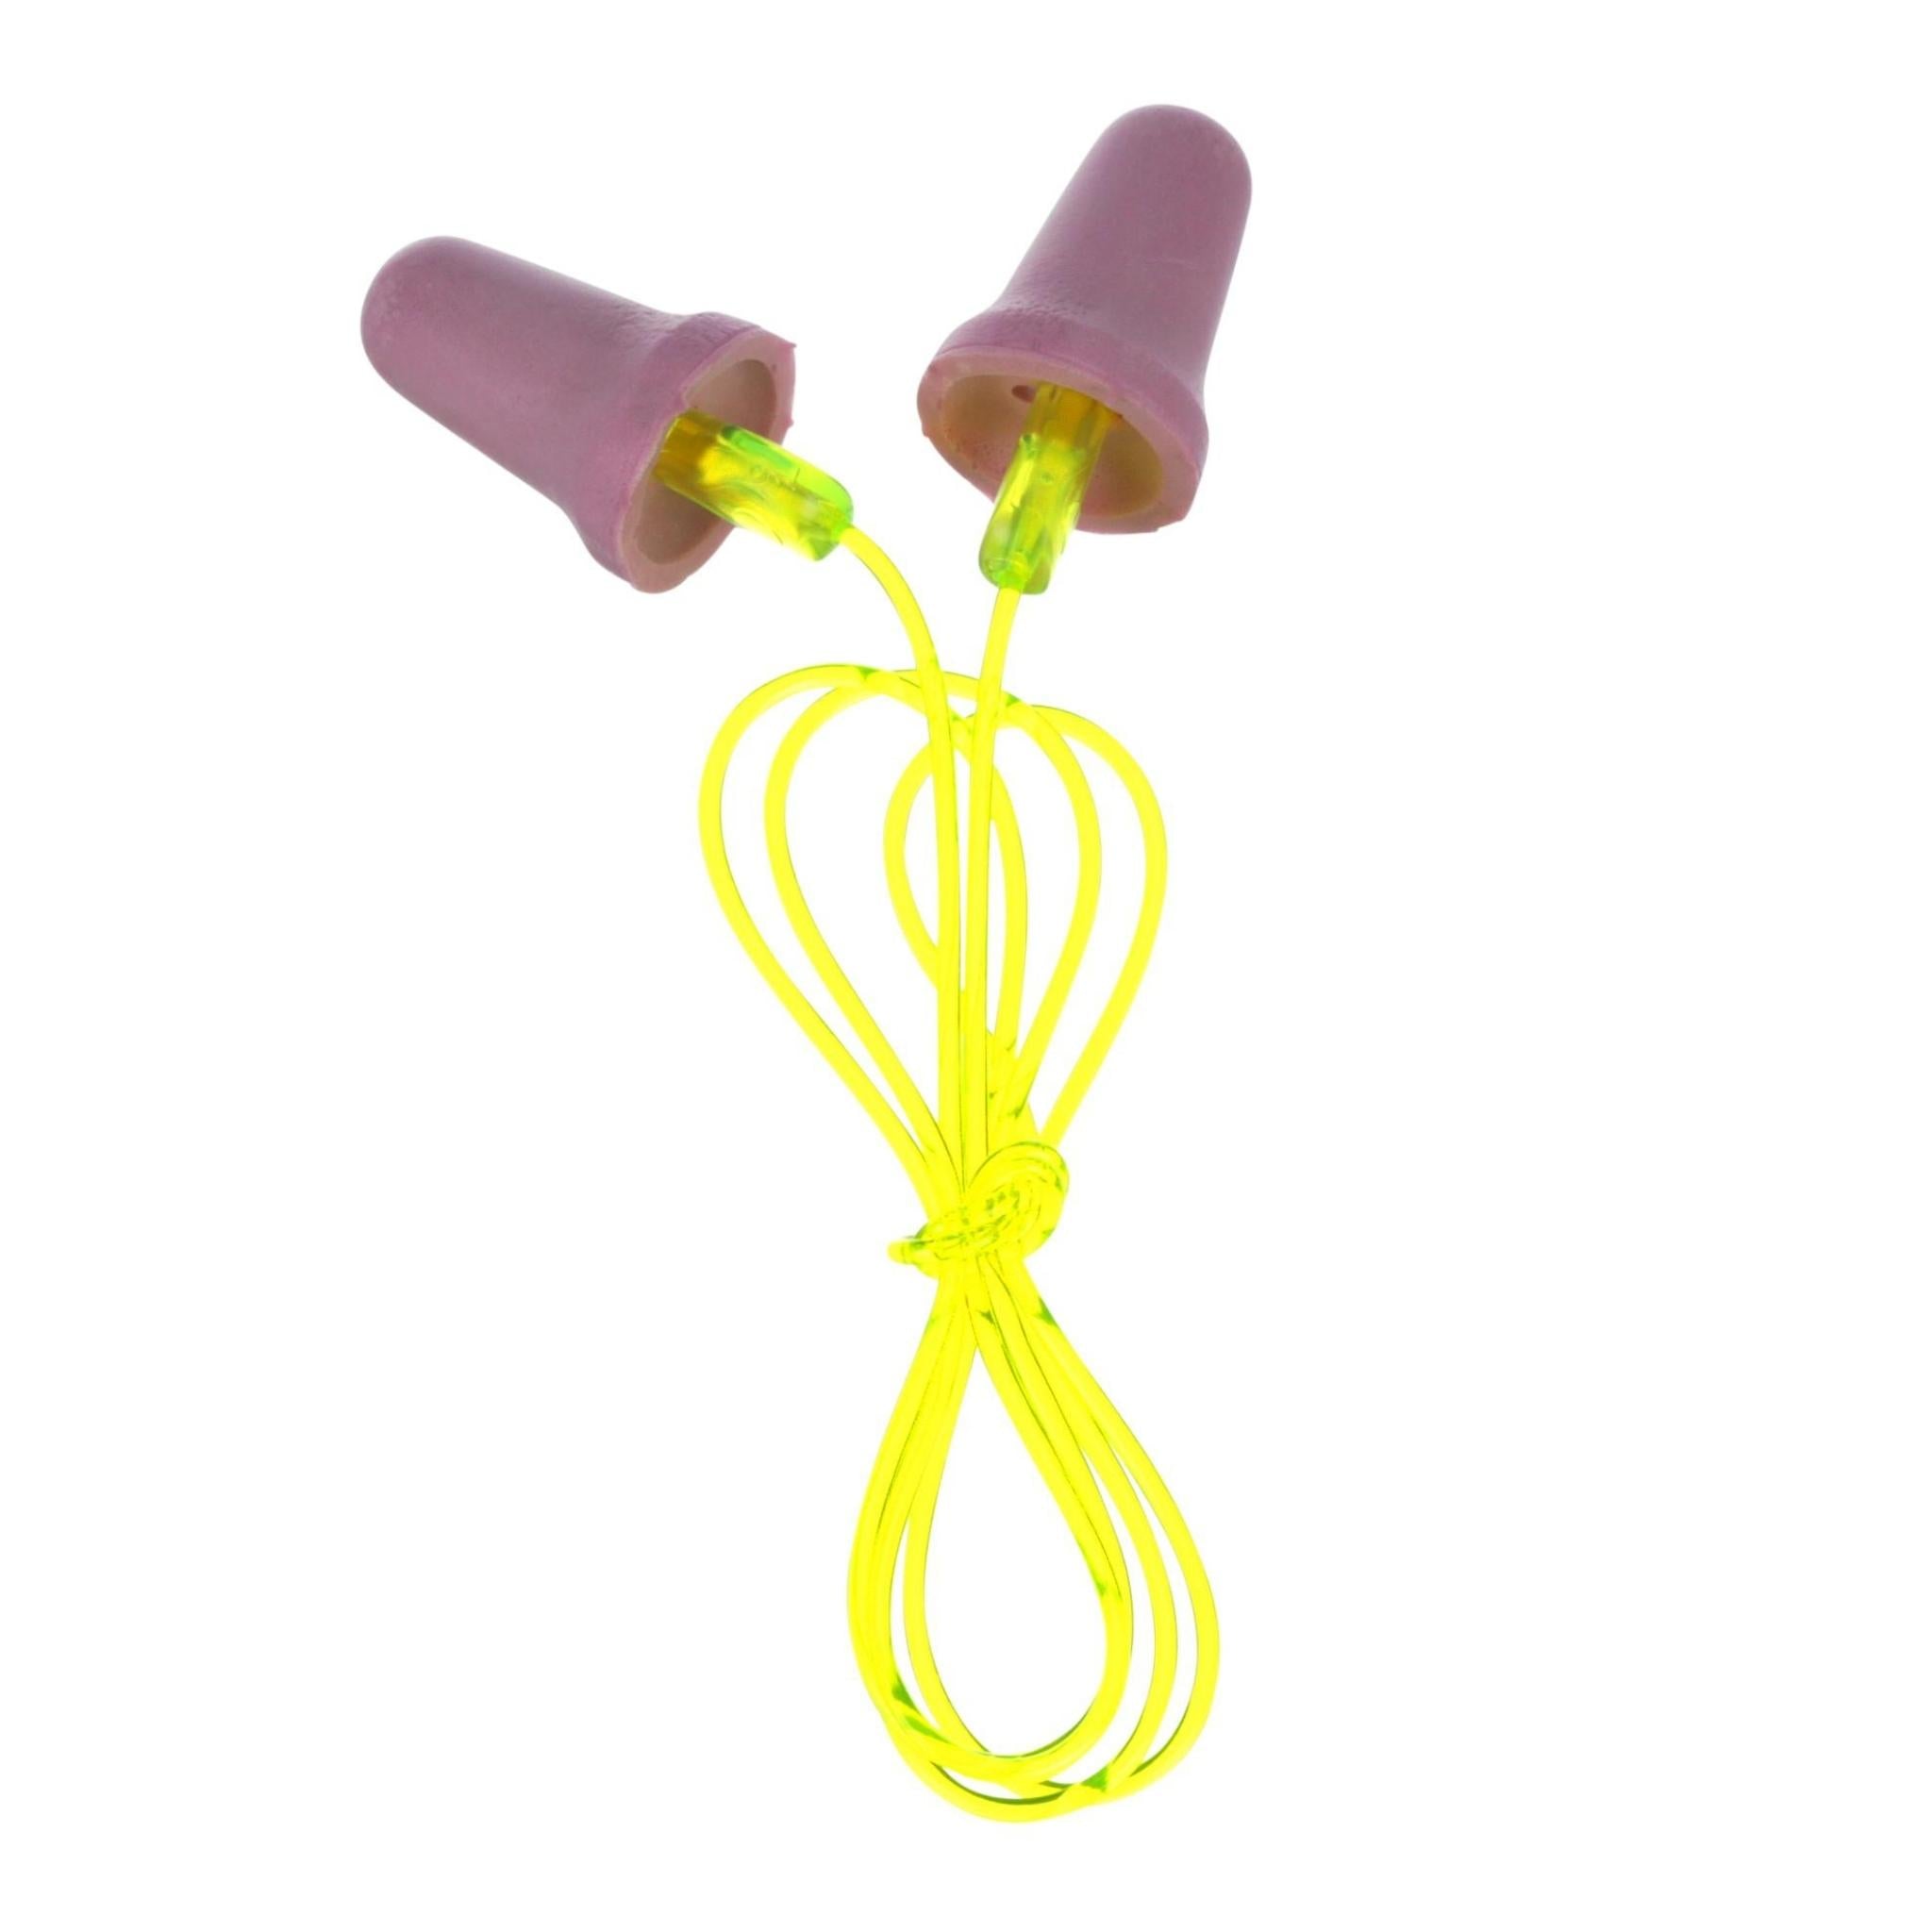 3M™ No-Touch™ Push-to-Fit Earplugs P2001, Corded 100 PAIR